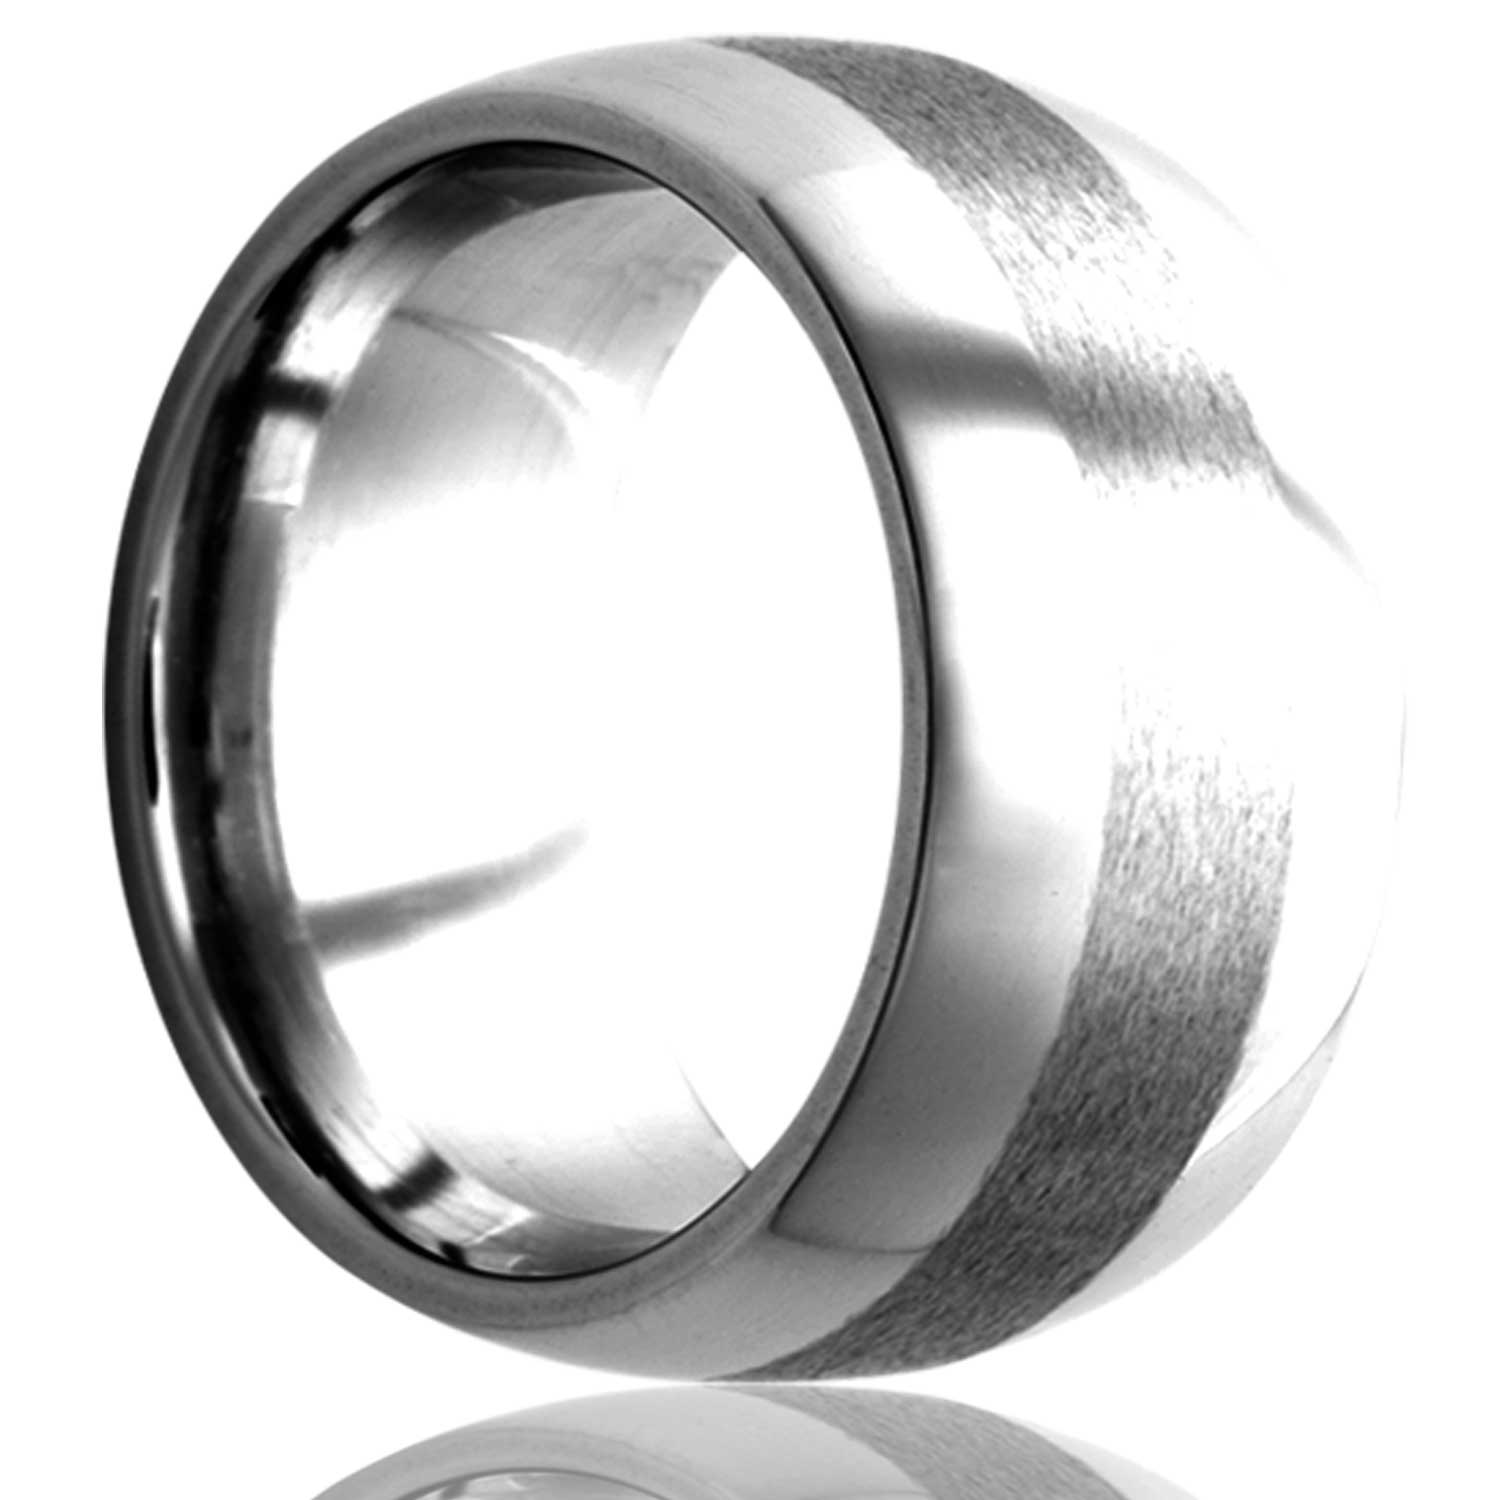 A domed tungsten wedding band with satin finish stripe displayed on a neutral white background.